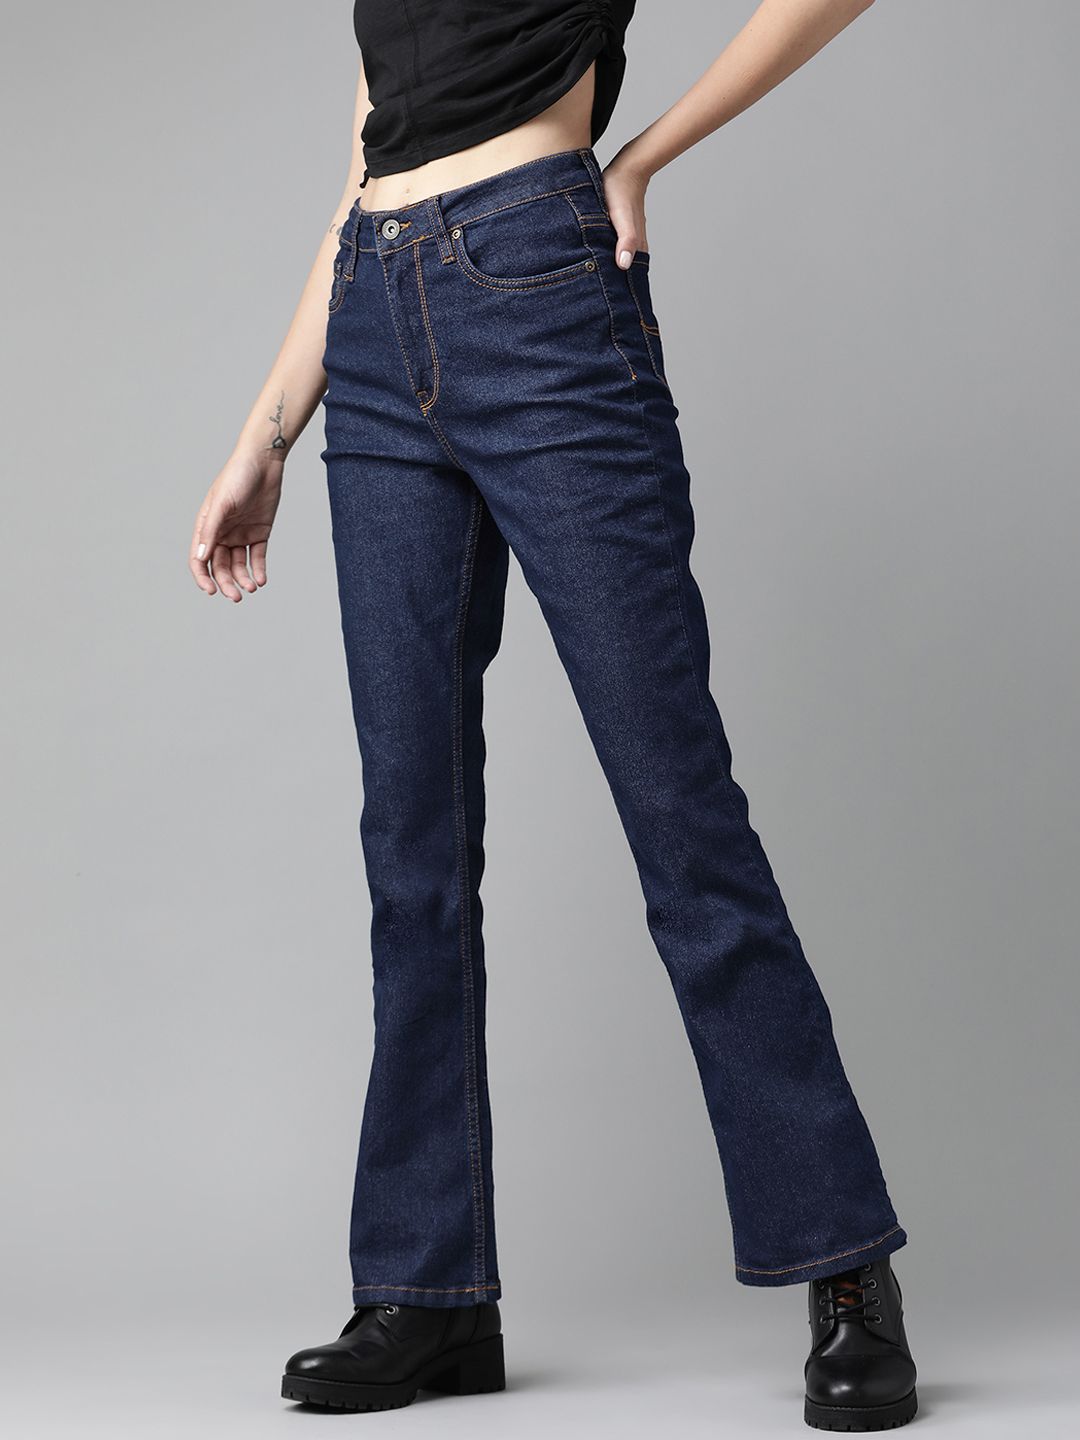 The Roadster Lifestyle Co Women Navy Blue Bootcut High-Rise Stretchable Jeans Price in India